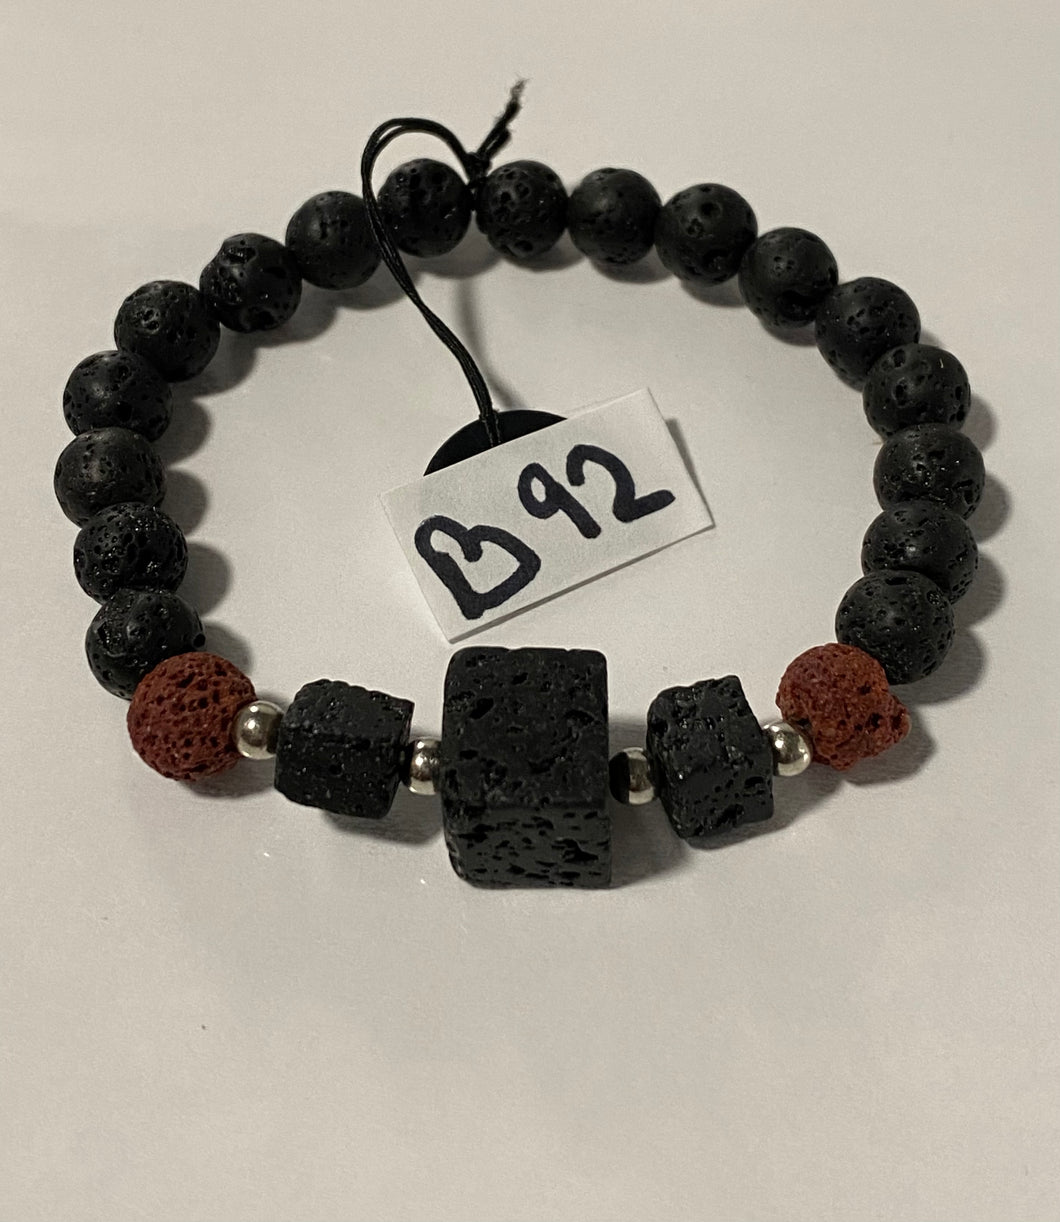 Refreshed and Rested - Brown and Black Lava Rocks - Stretchy Band - Bracelet